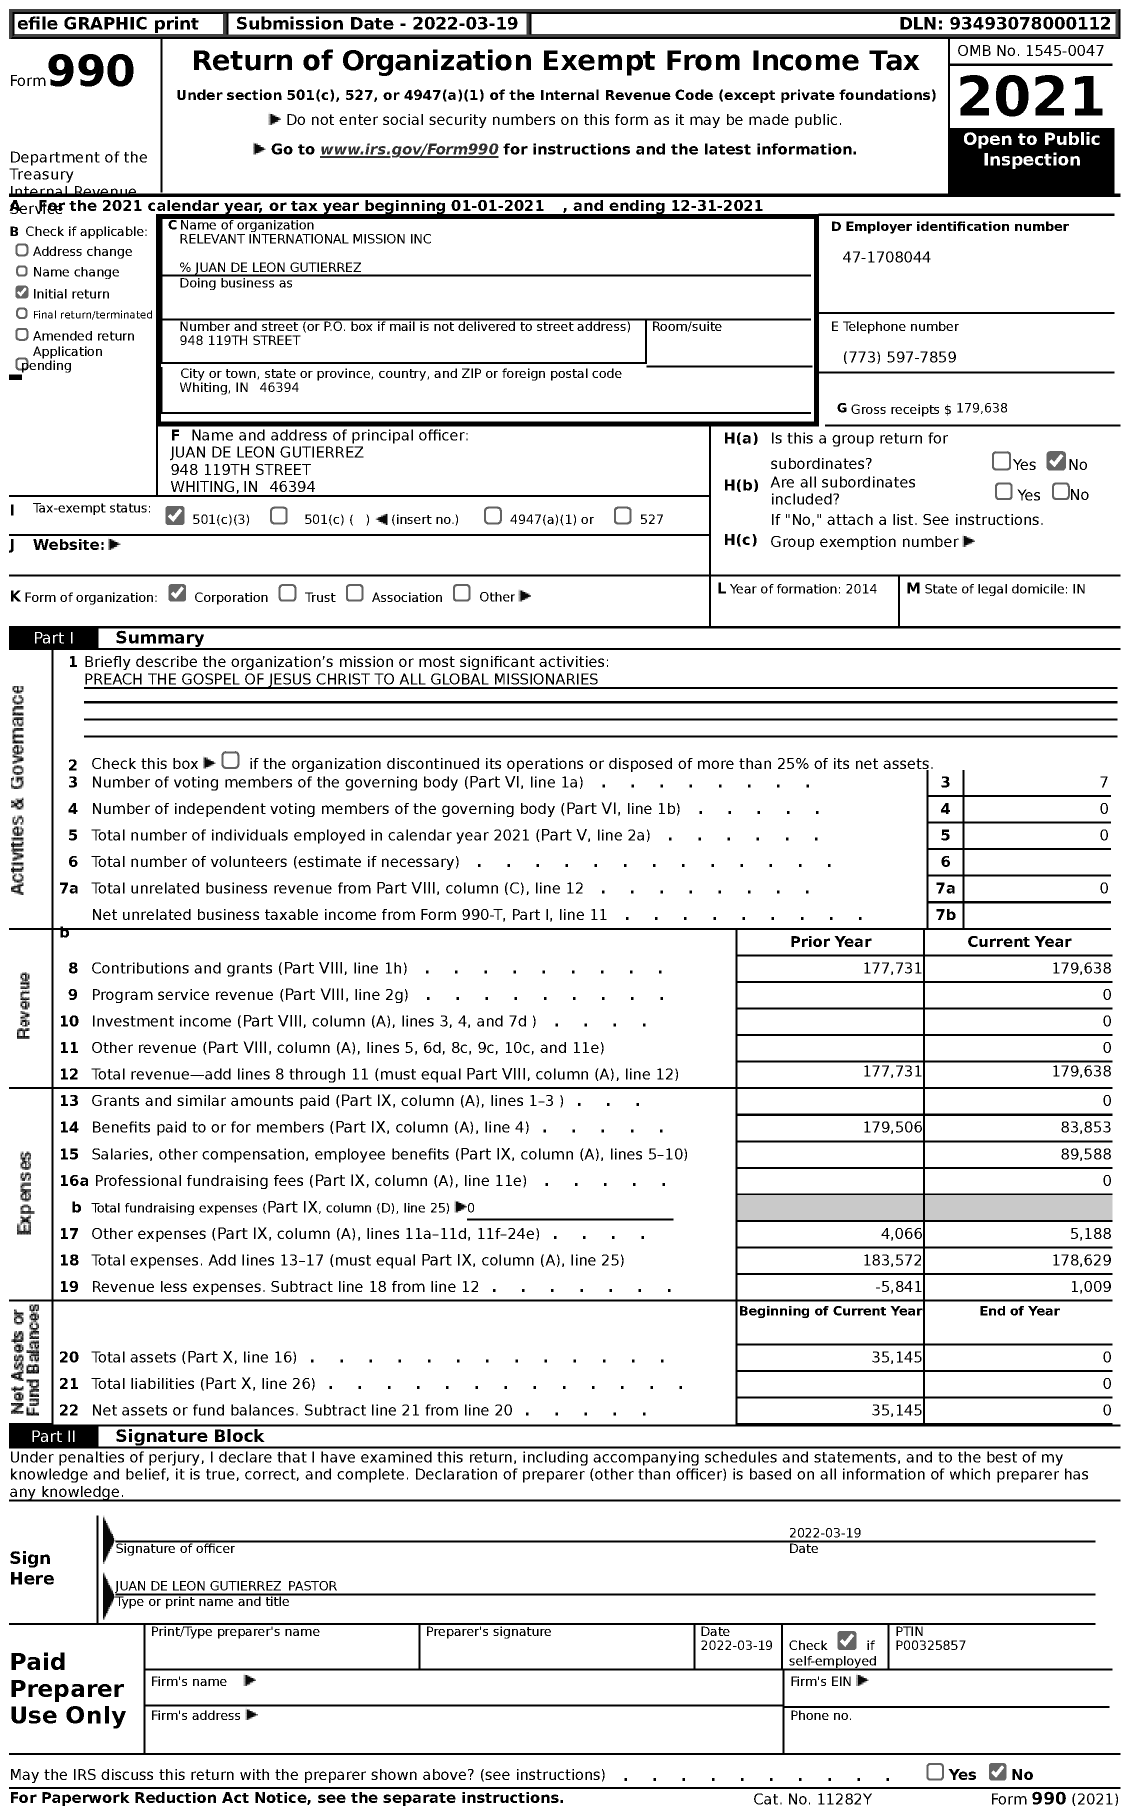 Image of first page of 2021 Form 990 for Relevant International Mission